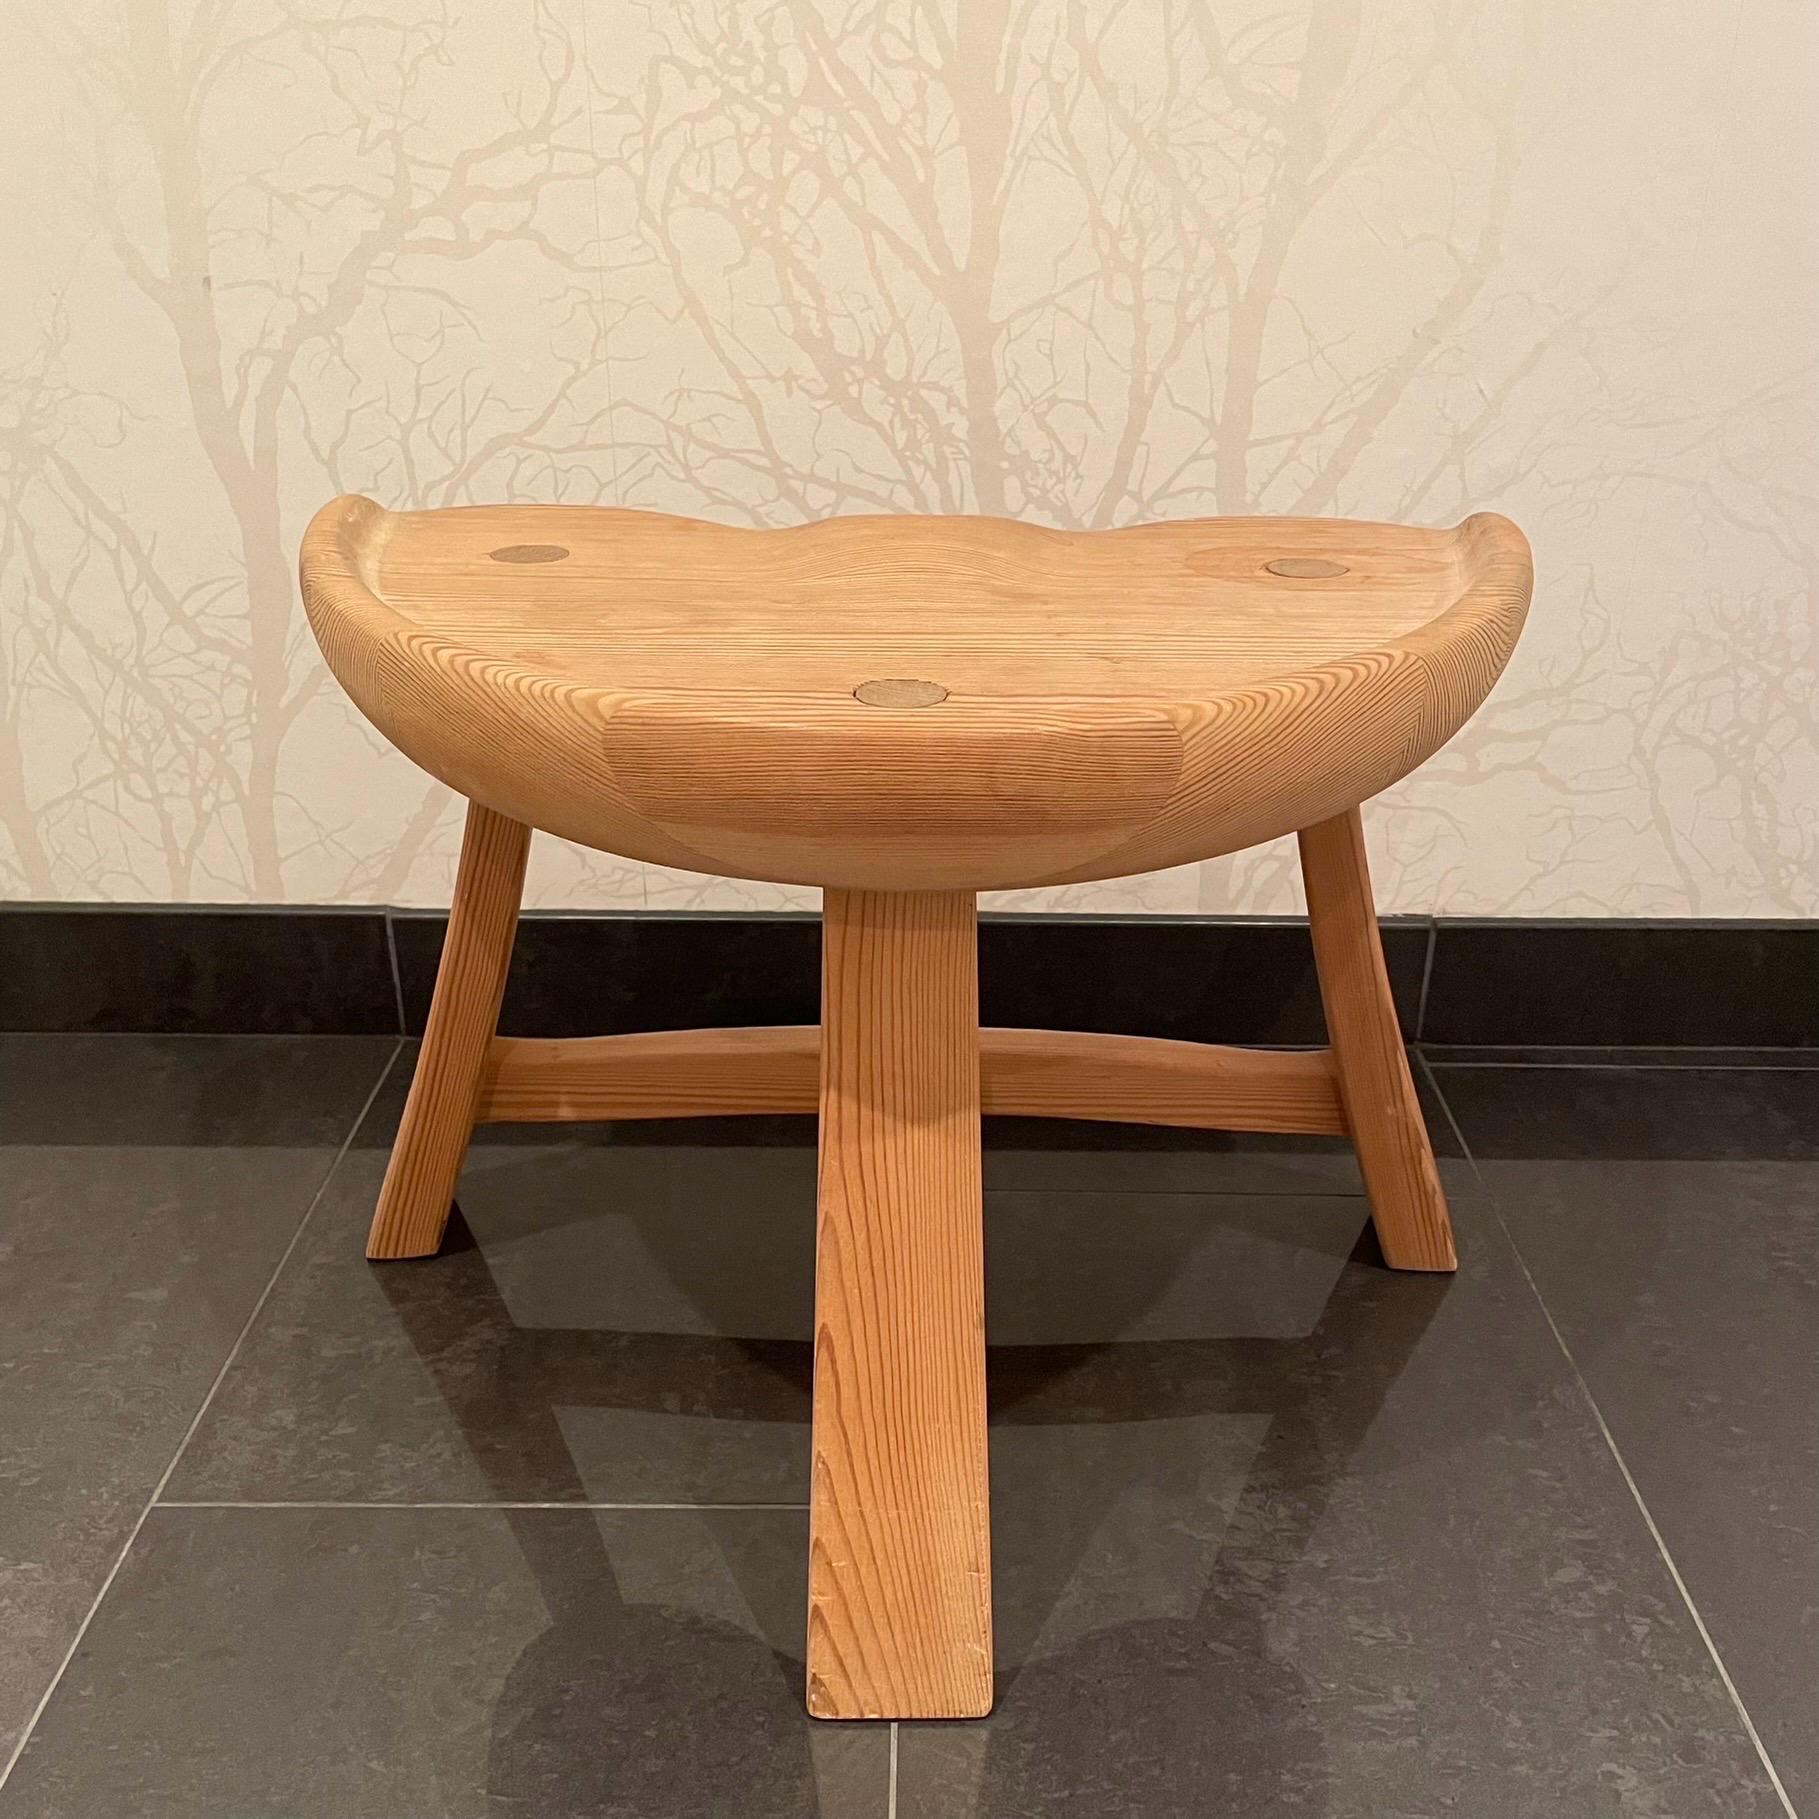 This is the Norwegian solid pine stool model nr 522. 
It comes in a stable, three legged construction with patinated untreated surface. The stool is burn marked “Krogenæs Möbler” on the underside of the seat. 

Model nr 522 was manufactured in a